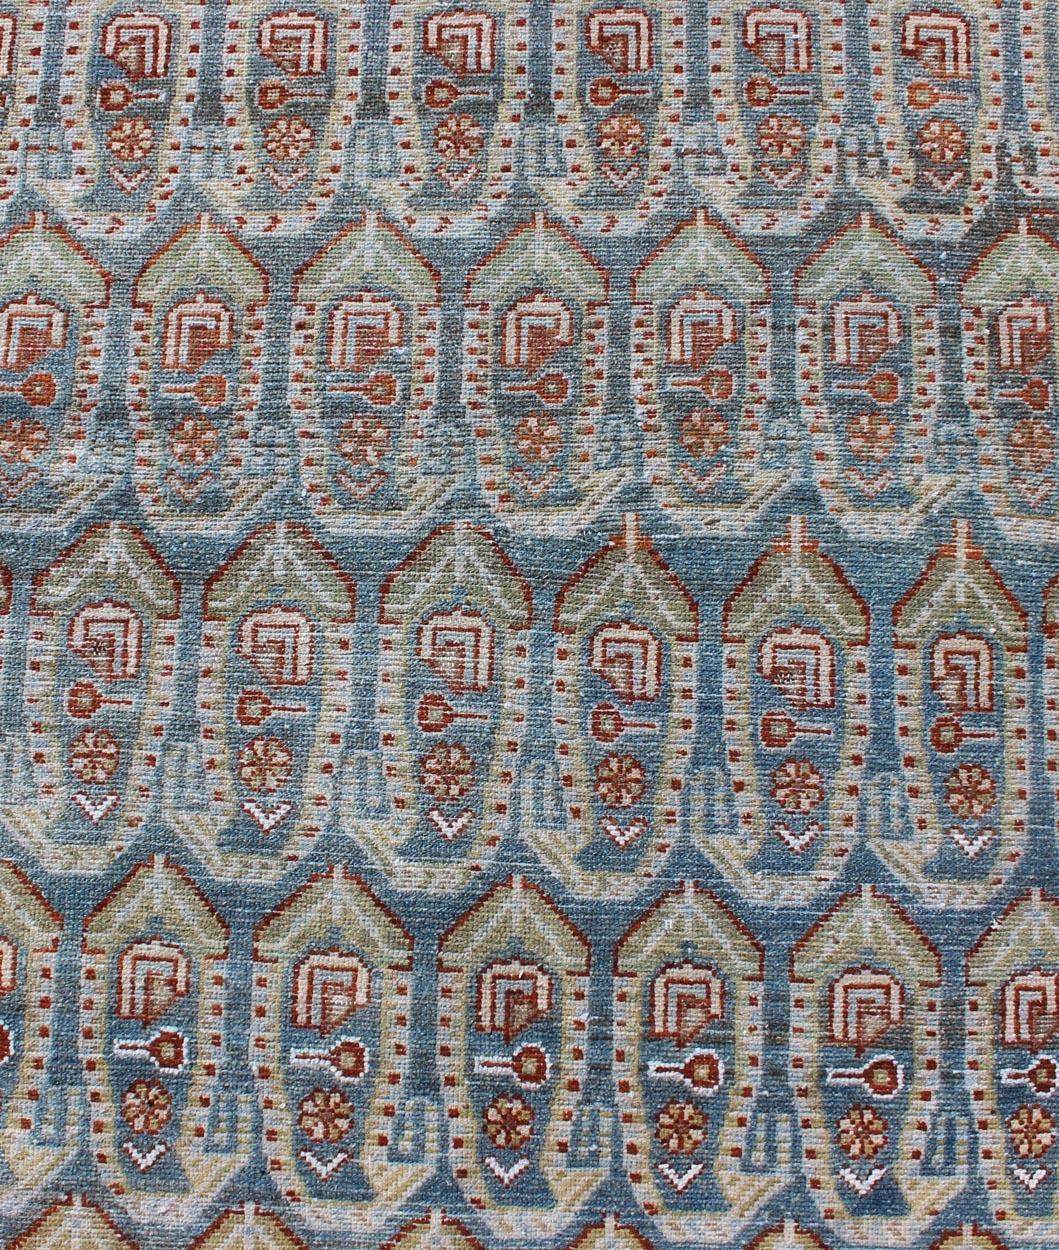 All-Over Paisley Pattern Antique Persian Malayer Rug in Blue and Red In Excellent Condition For Sale In Atlanta, GA